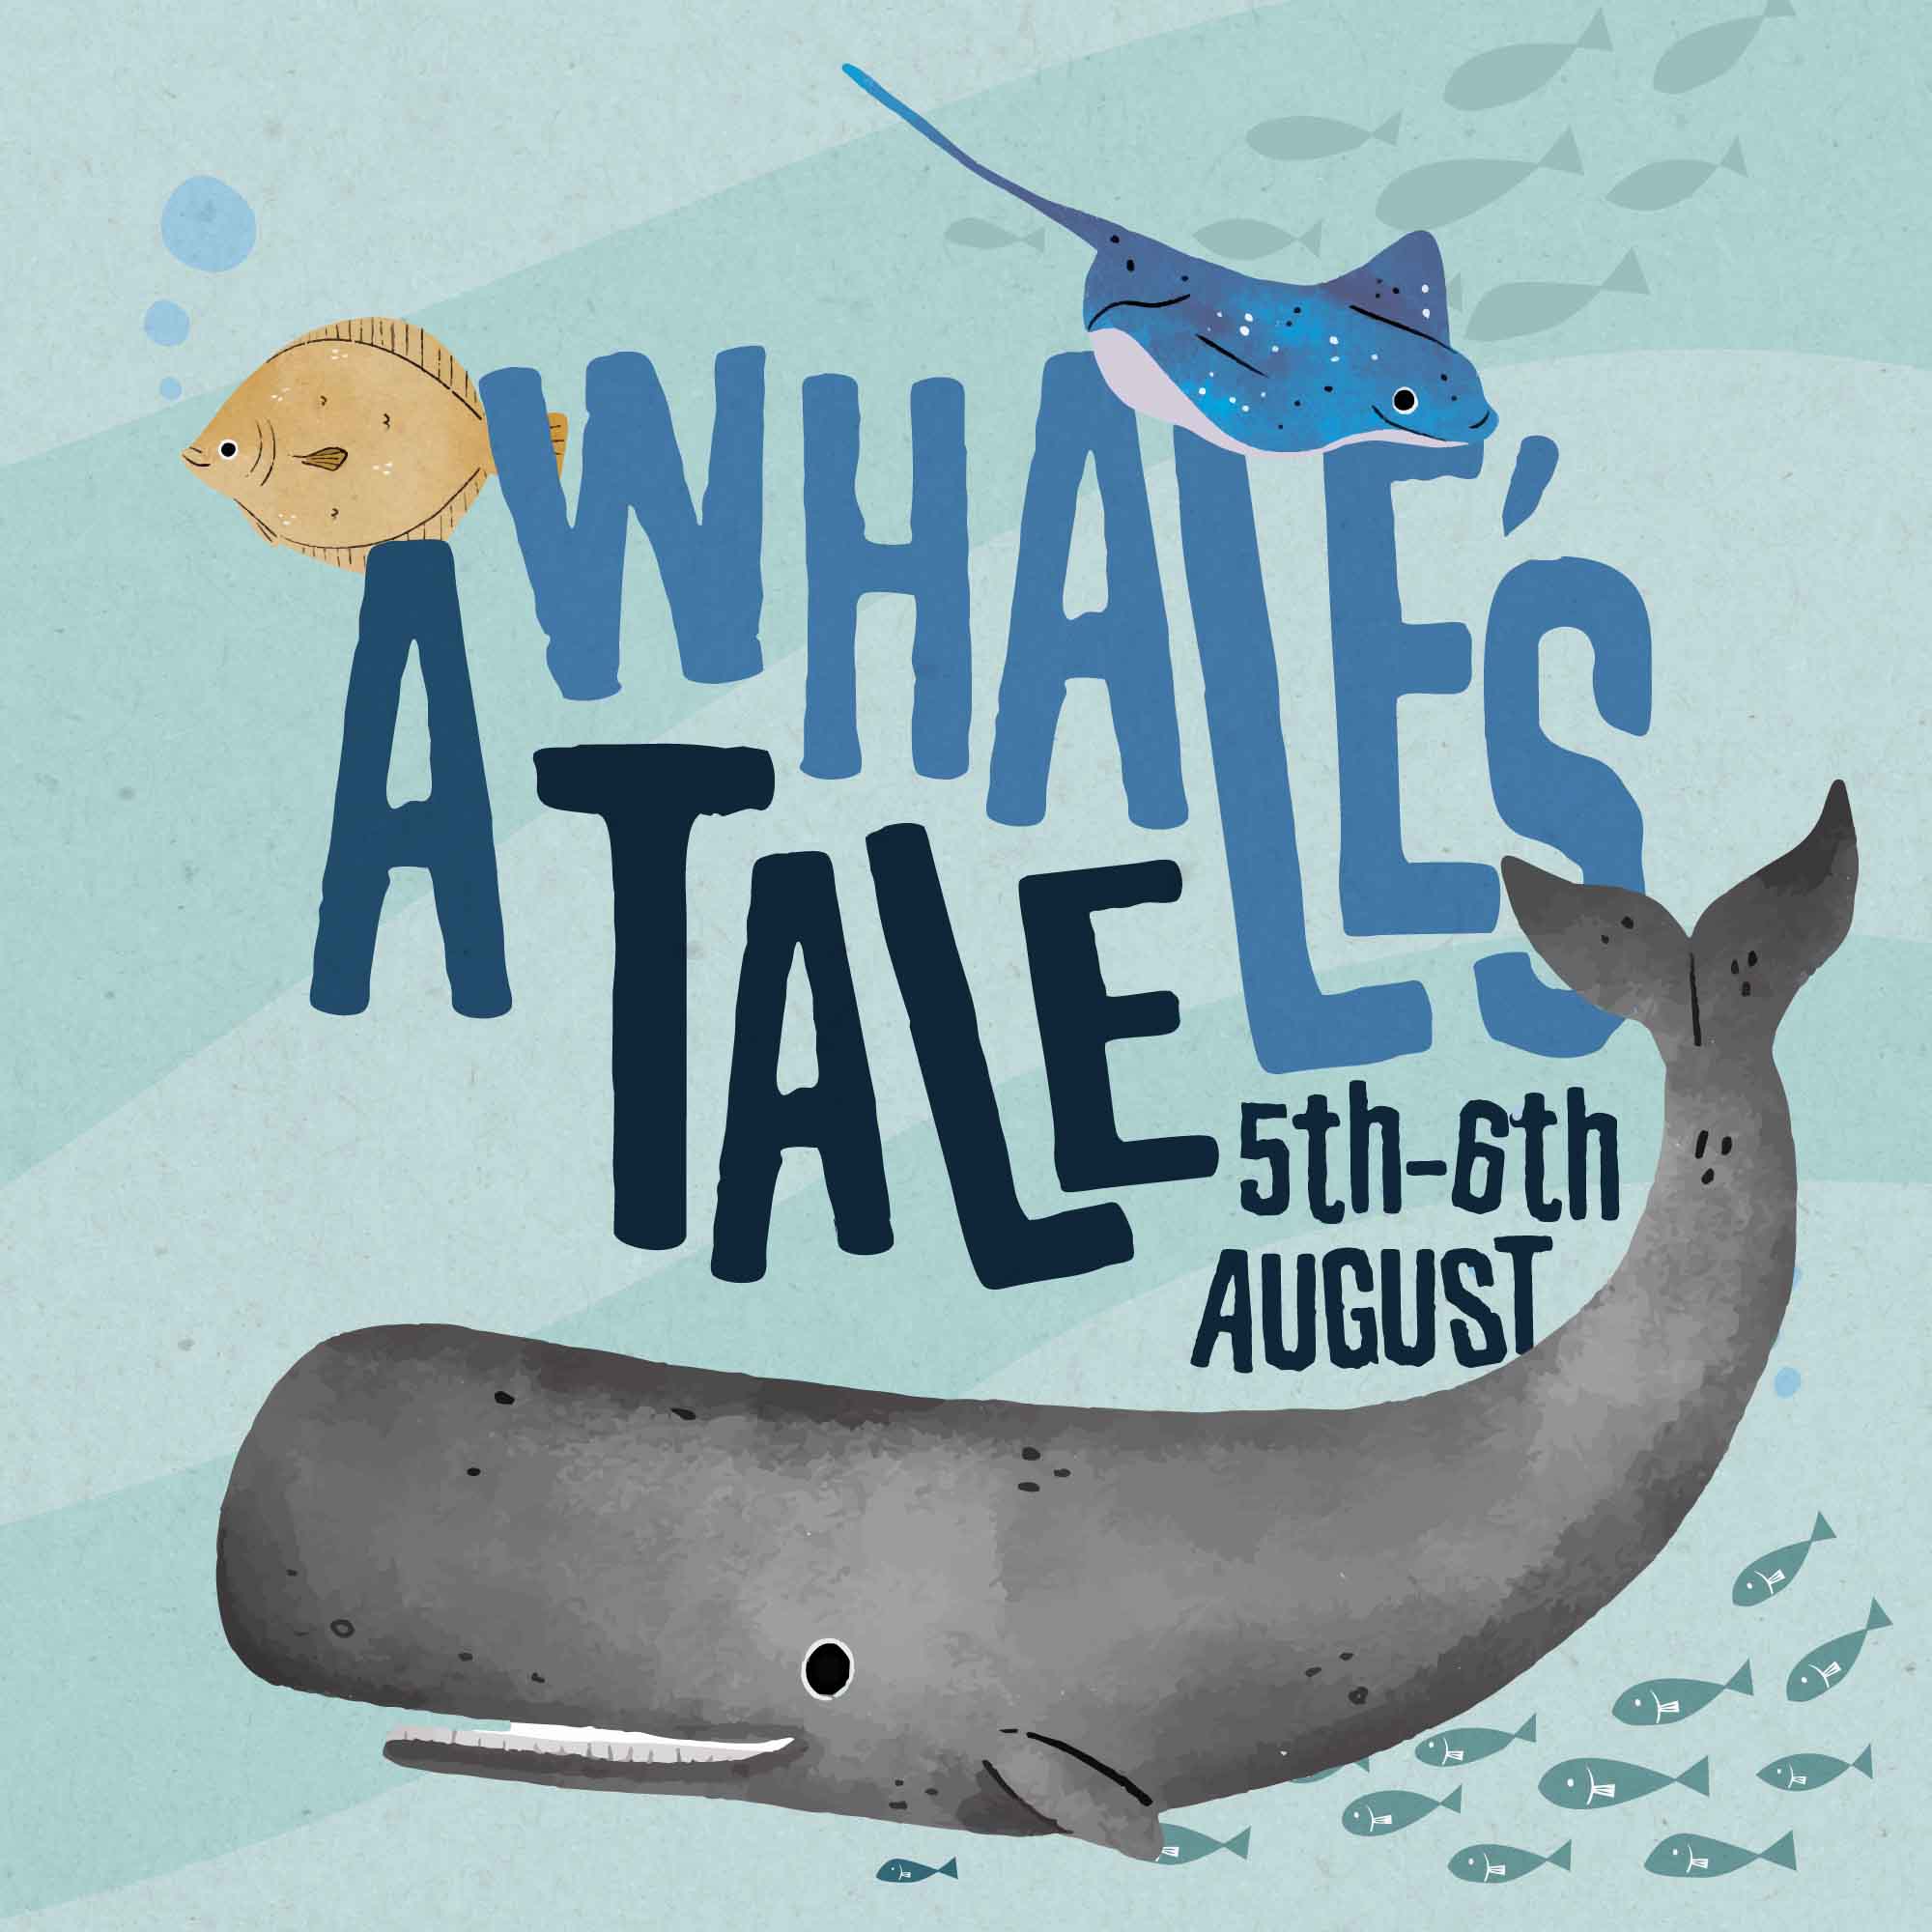 A Whale’s Tale